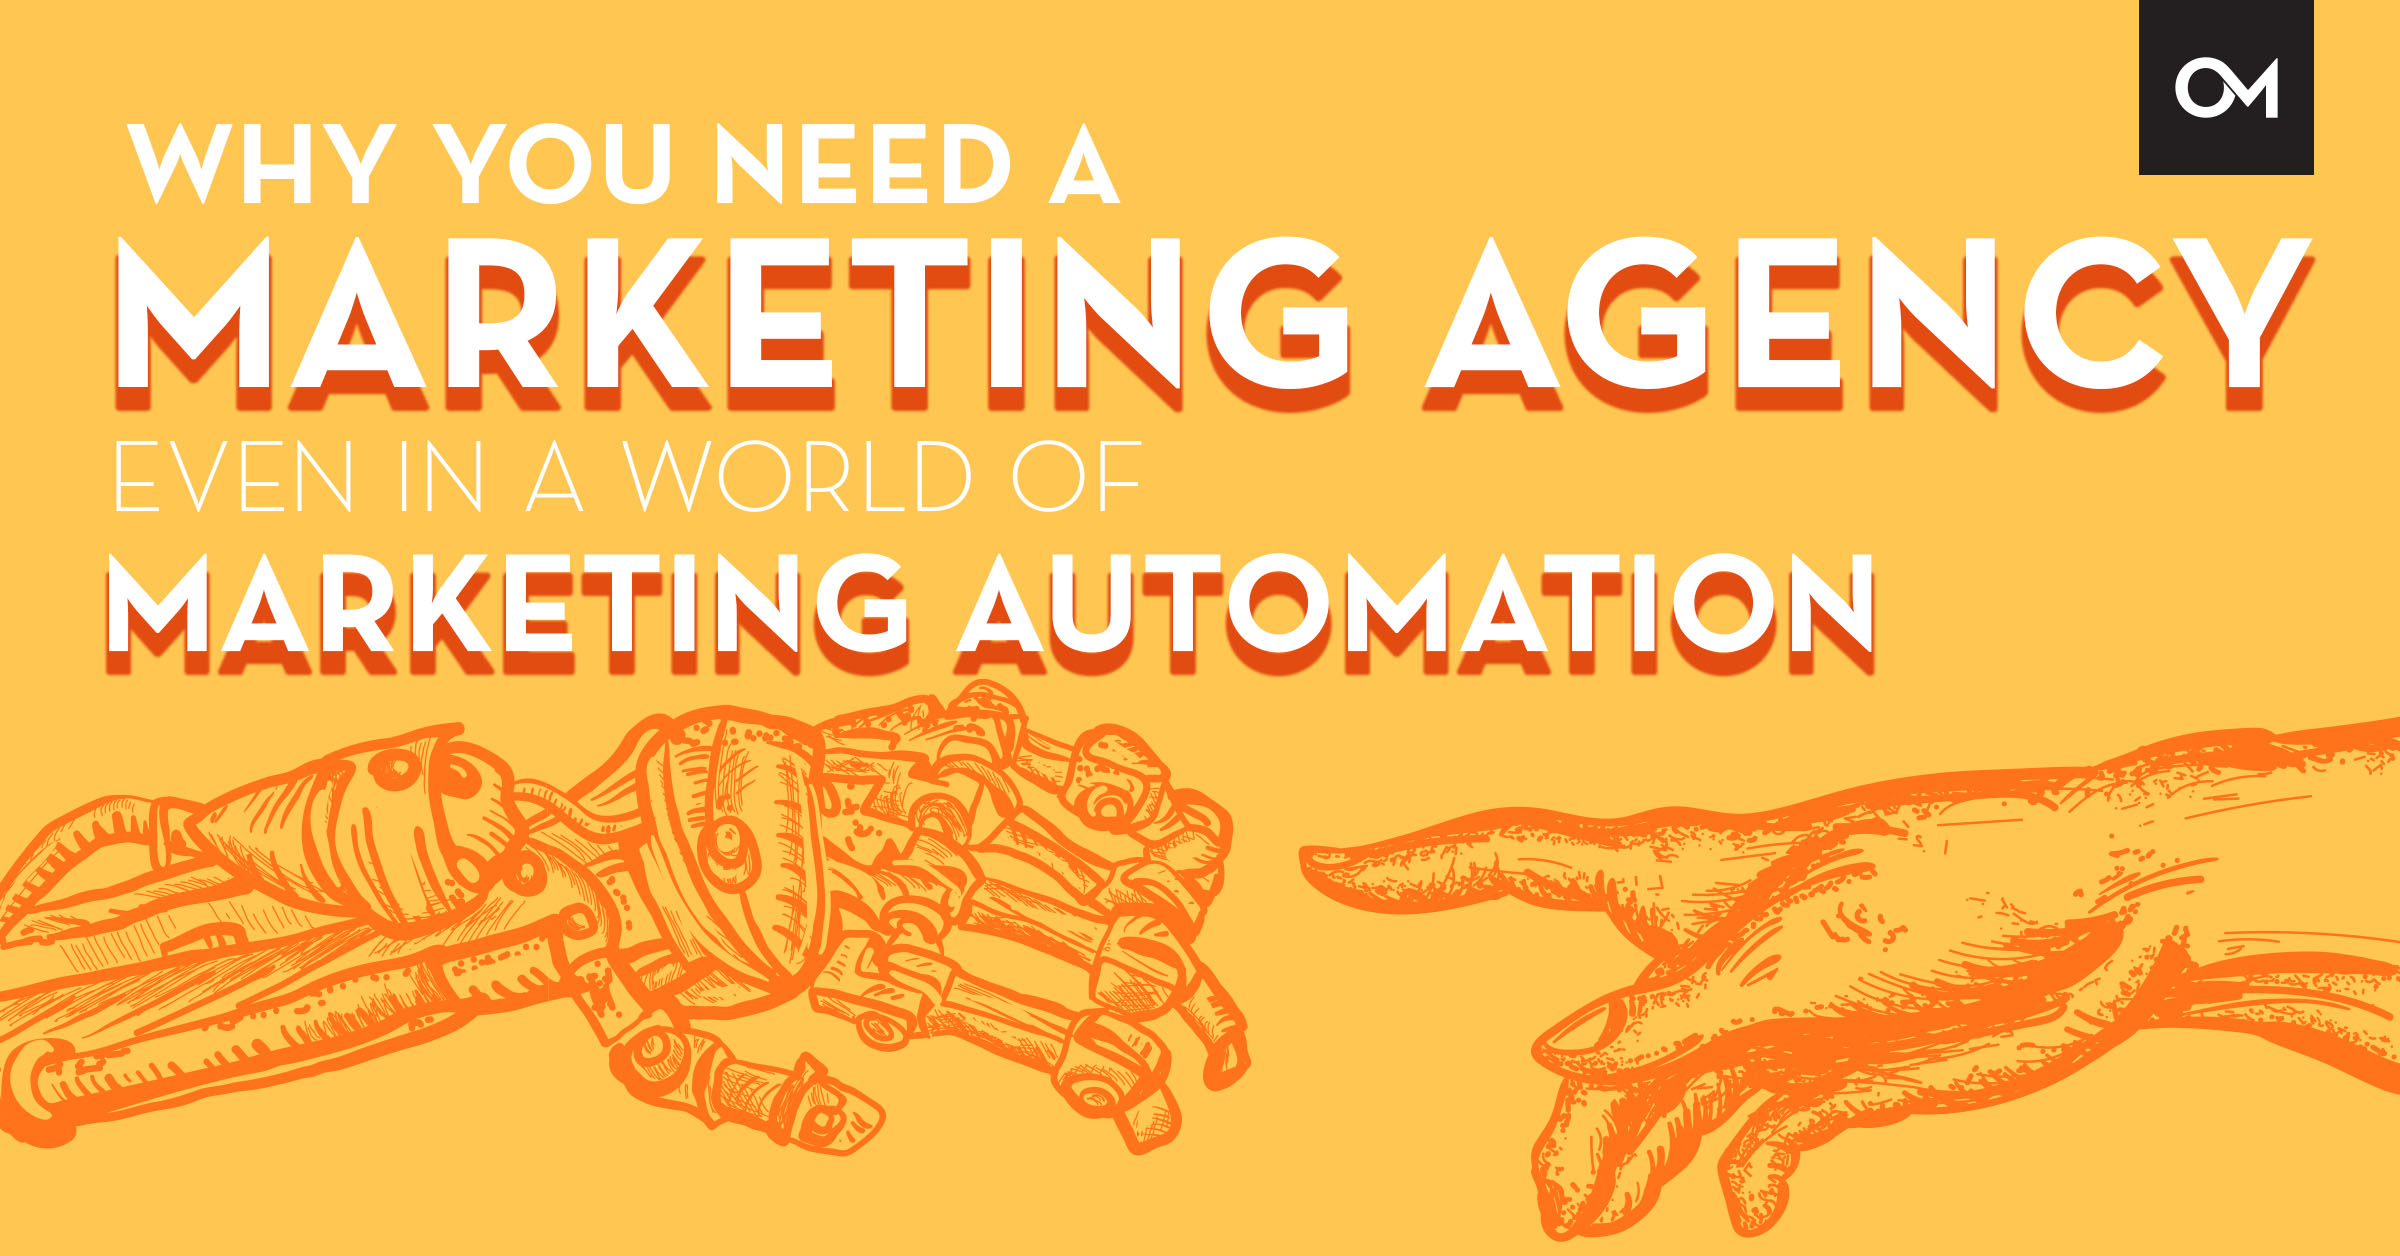 Why you need a marketing agency in a a world of marketing automation.